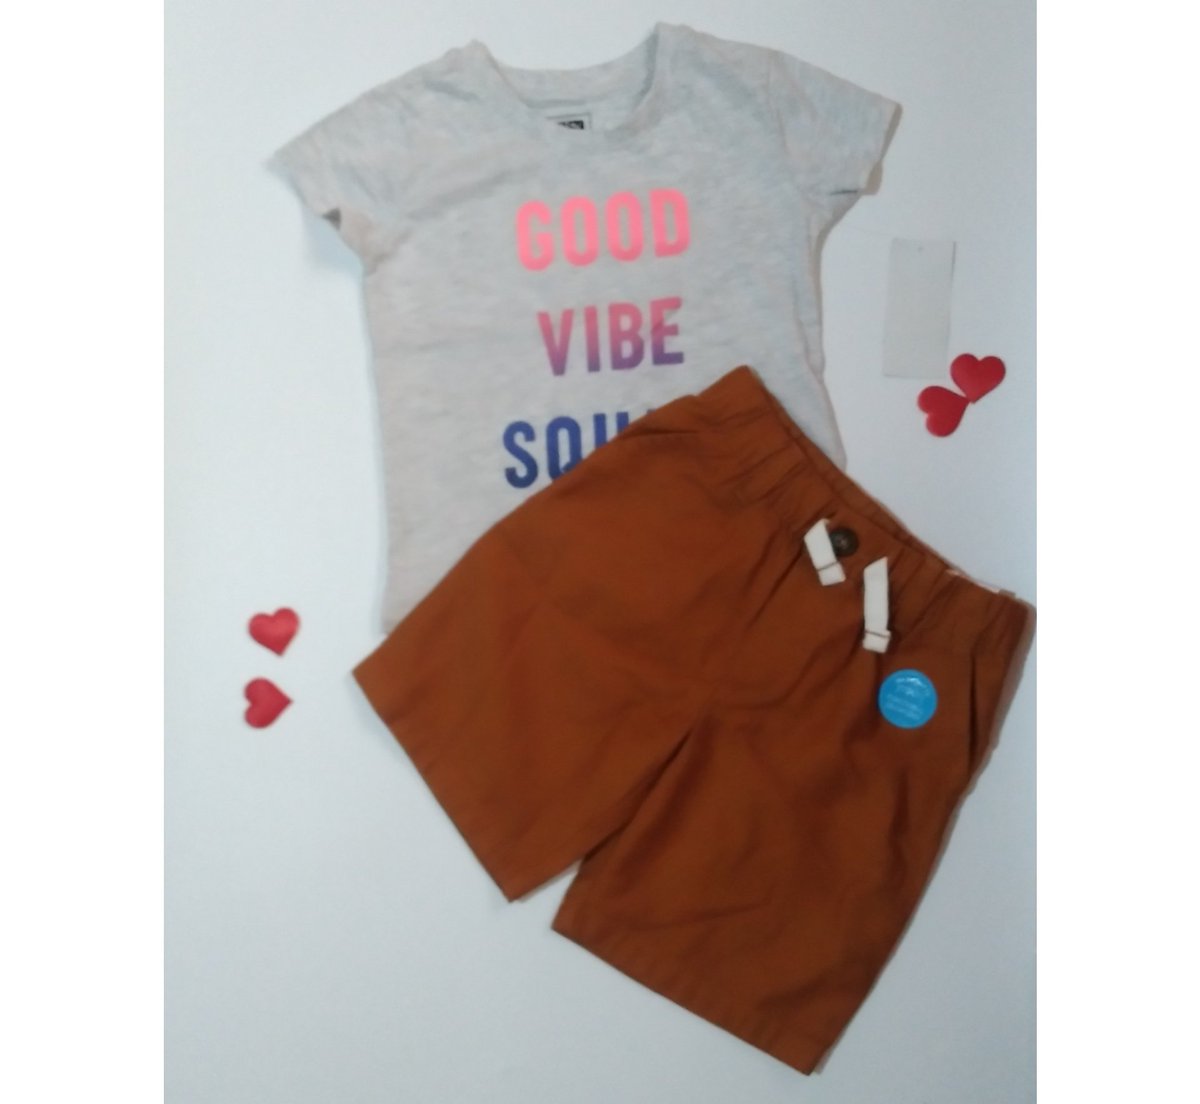 I styled both 👇
They can bought together as a pair or separately 

Price
Tees : N3,500
Short : N4,500

Brand
Carter's 

Age
5-7 years old 

Send a DM to place your order